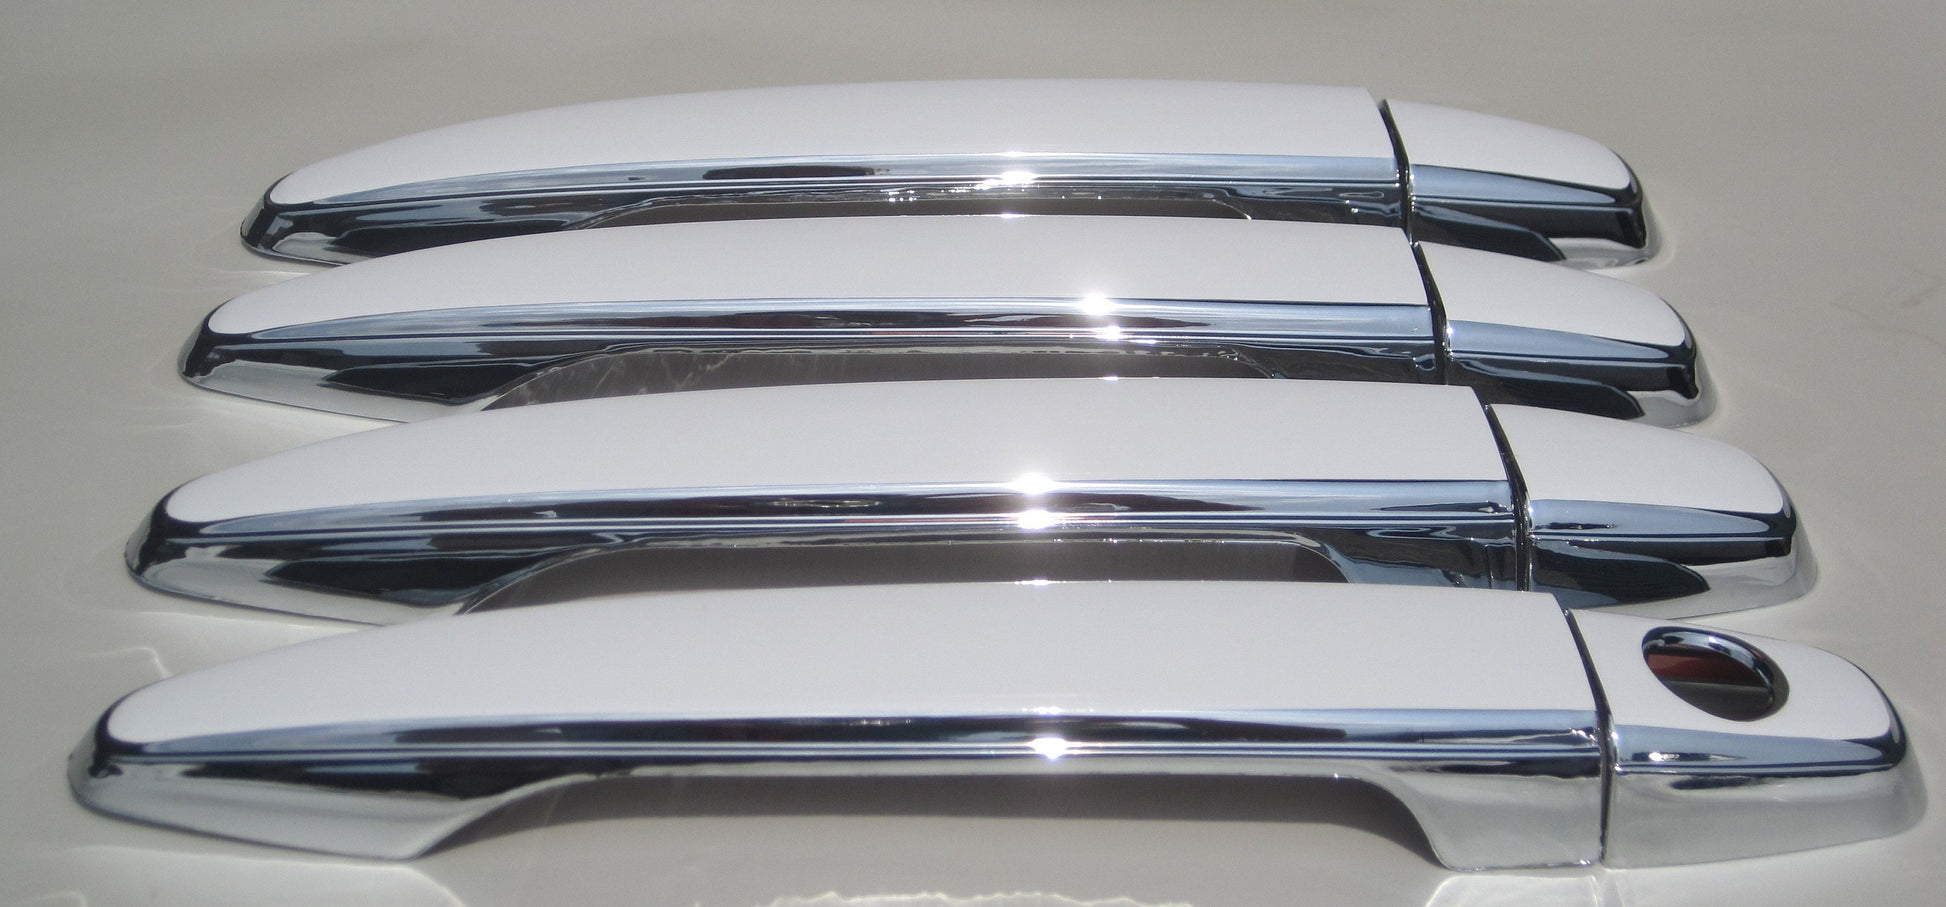 Full Set of Custom Black OR Chrome Door Handle Overlays / Covers For 2006 - 2007 Lexus GS430 - You Choose the Color of the Middle Insert